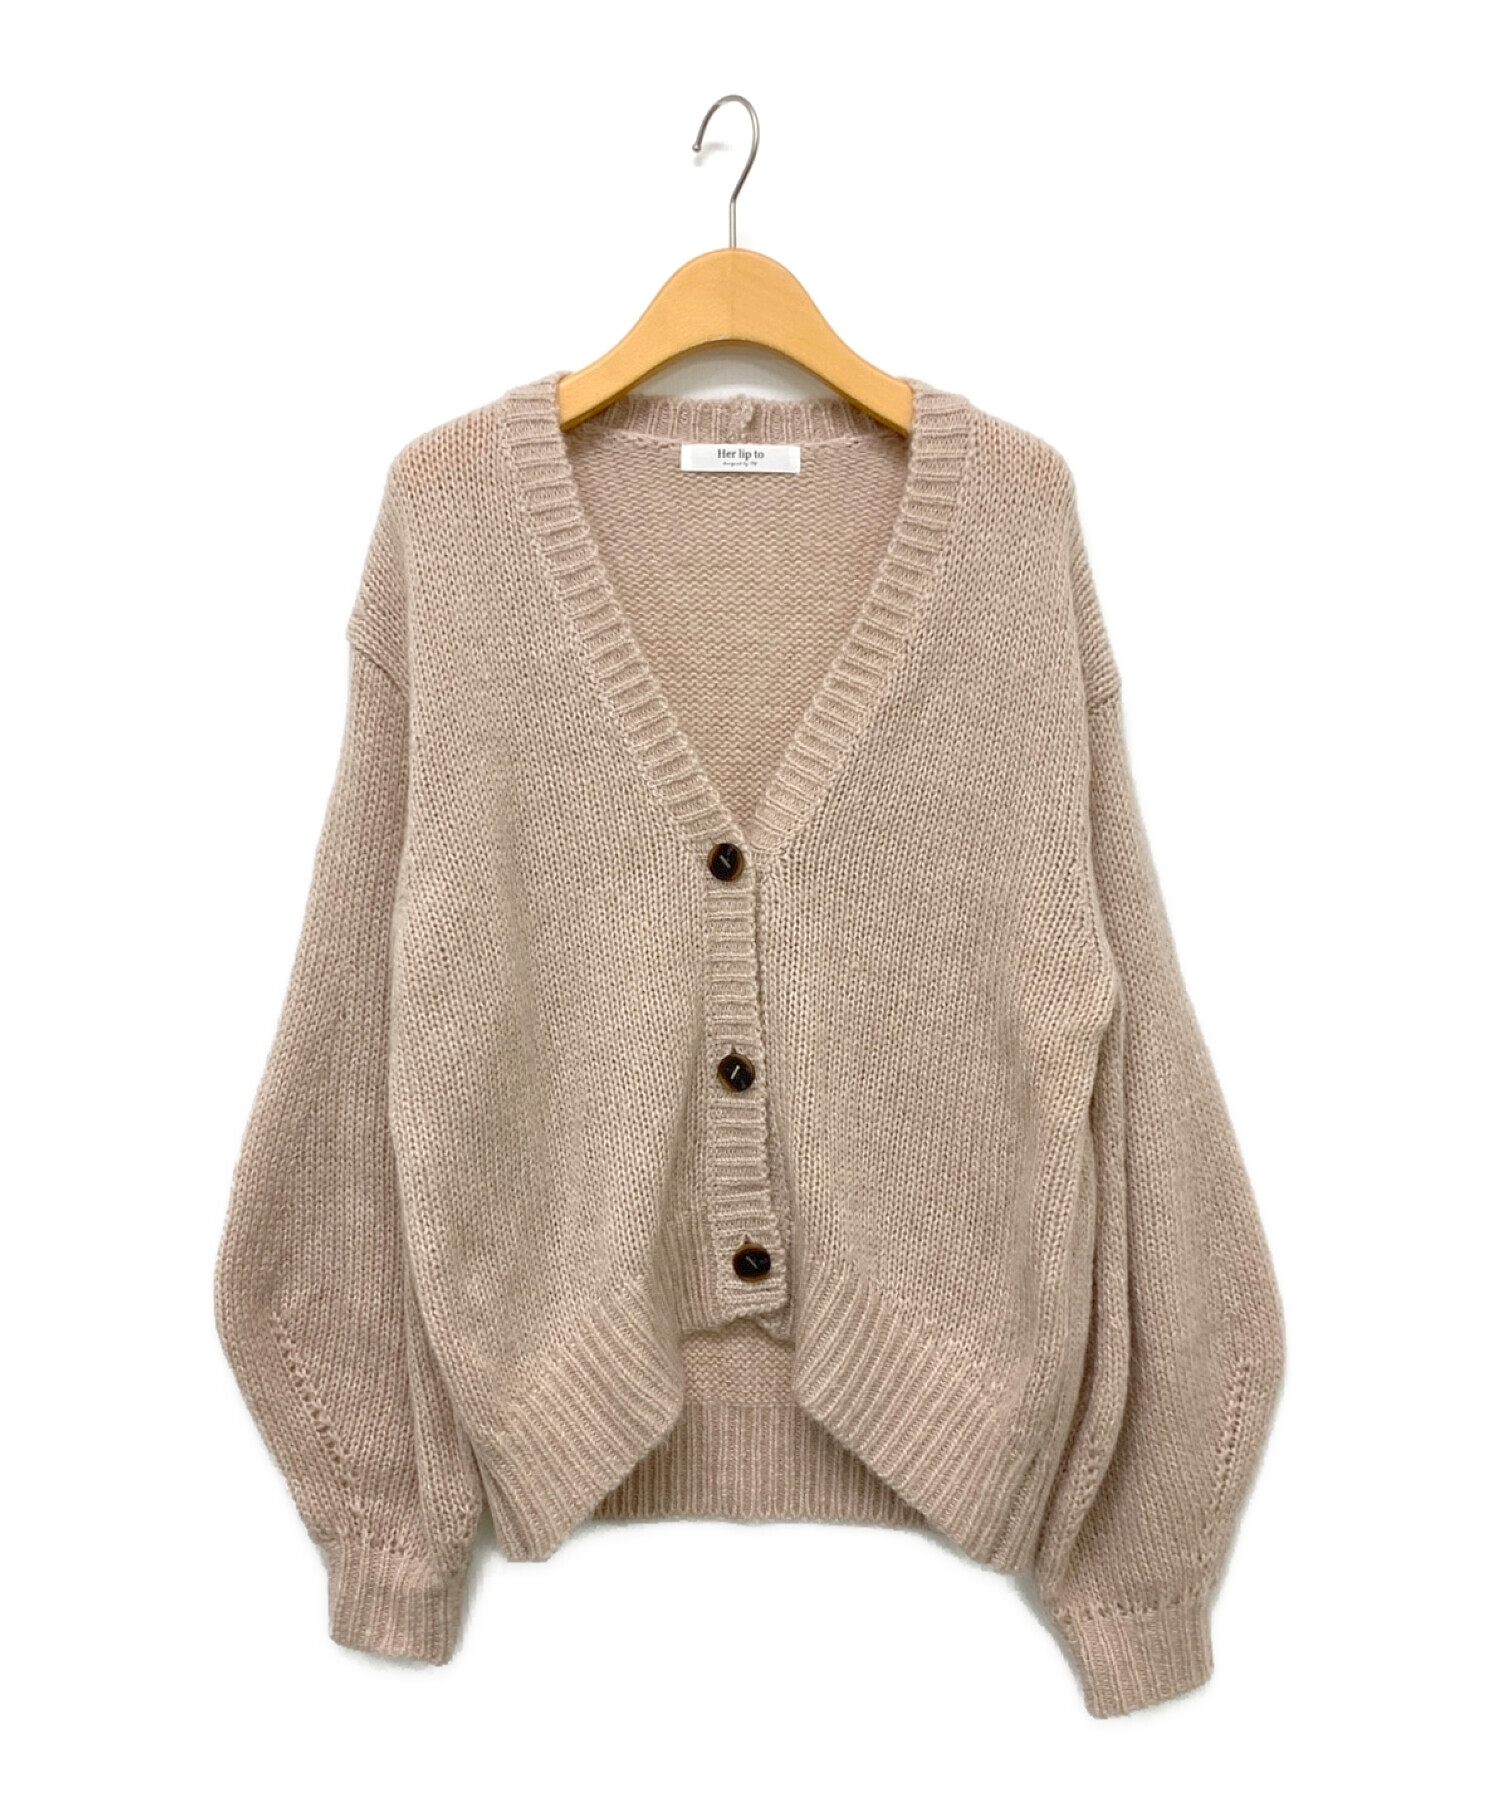 Her lip to Essential Wool-Blend Cardigan